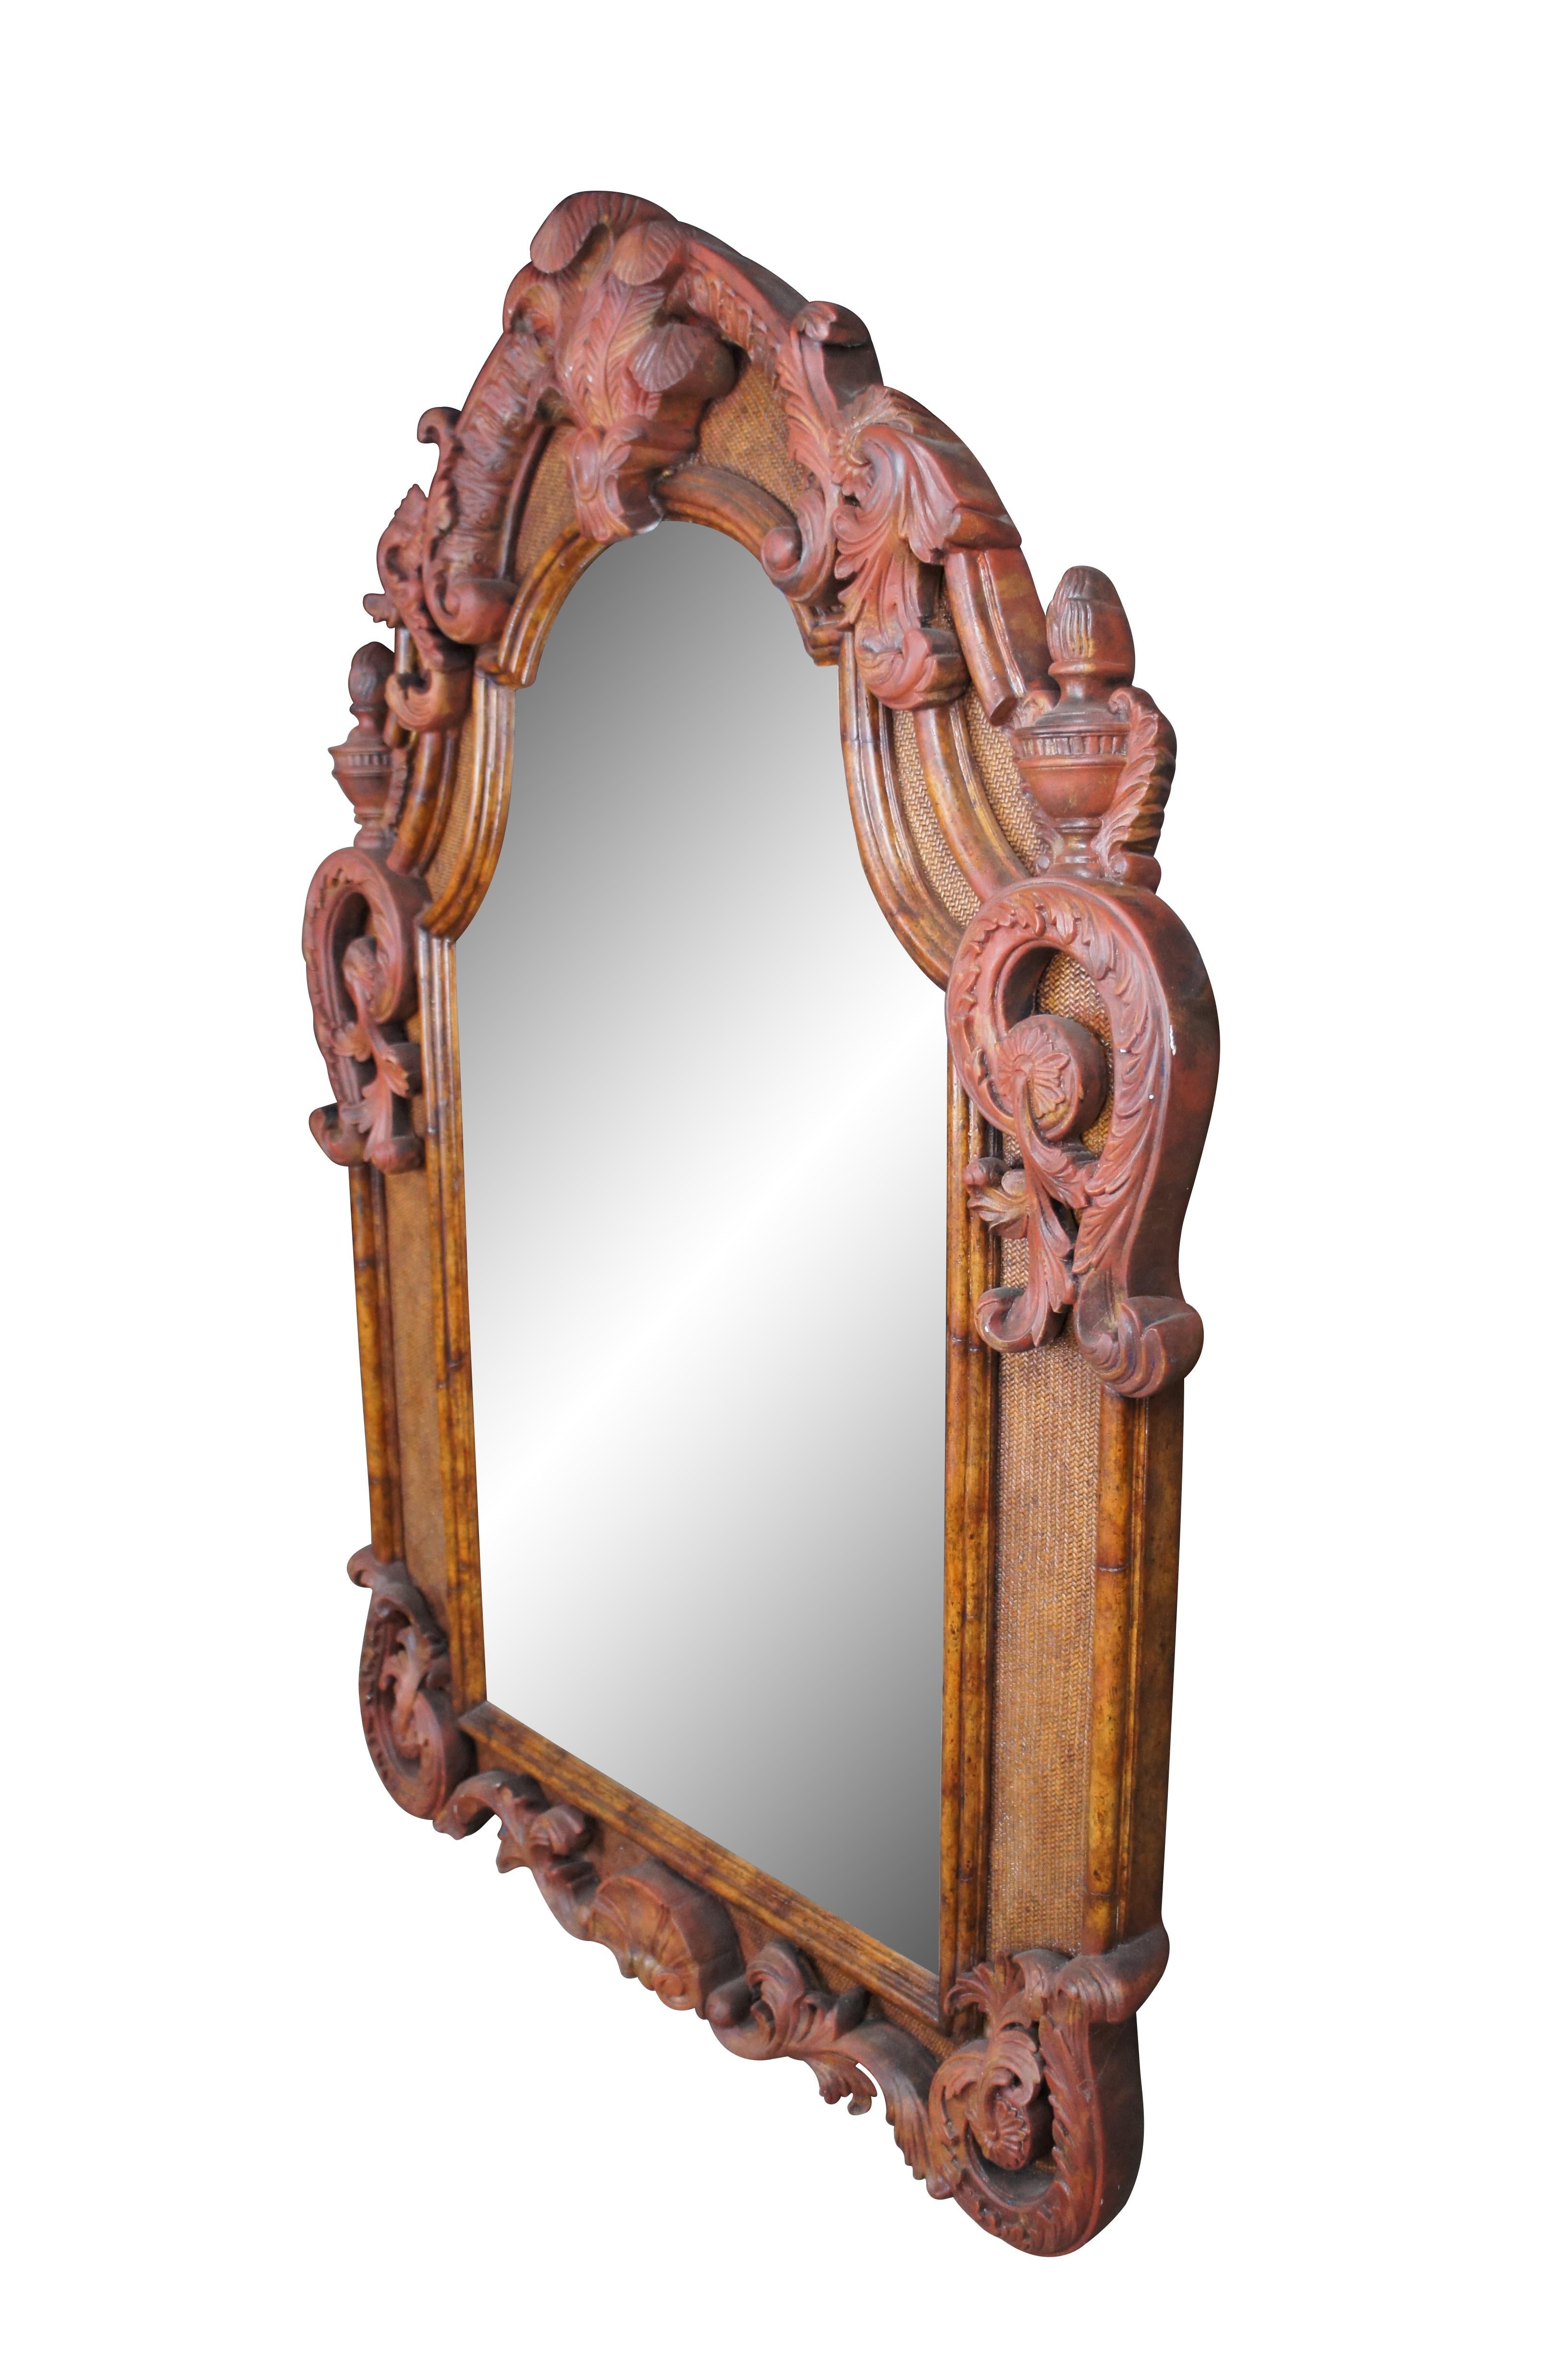 Maitland Smith Victorian Revival Baroque Rococo Style Over Mantel Wall Mirror In Good Condition For Sale In Dayton, OH